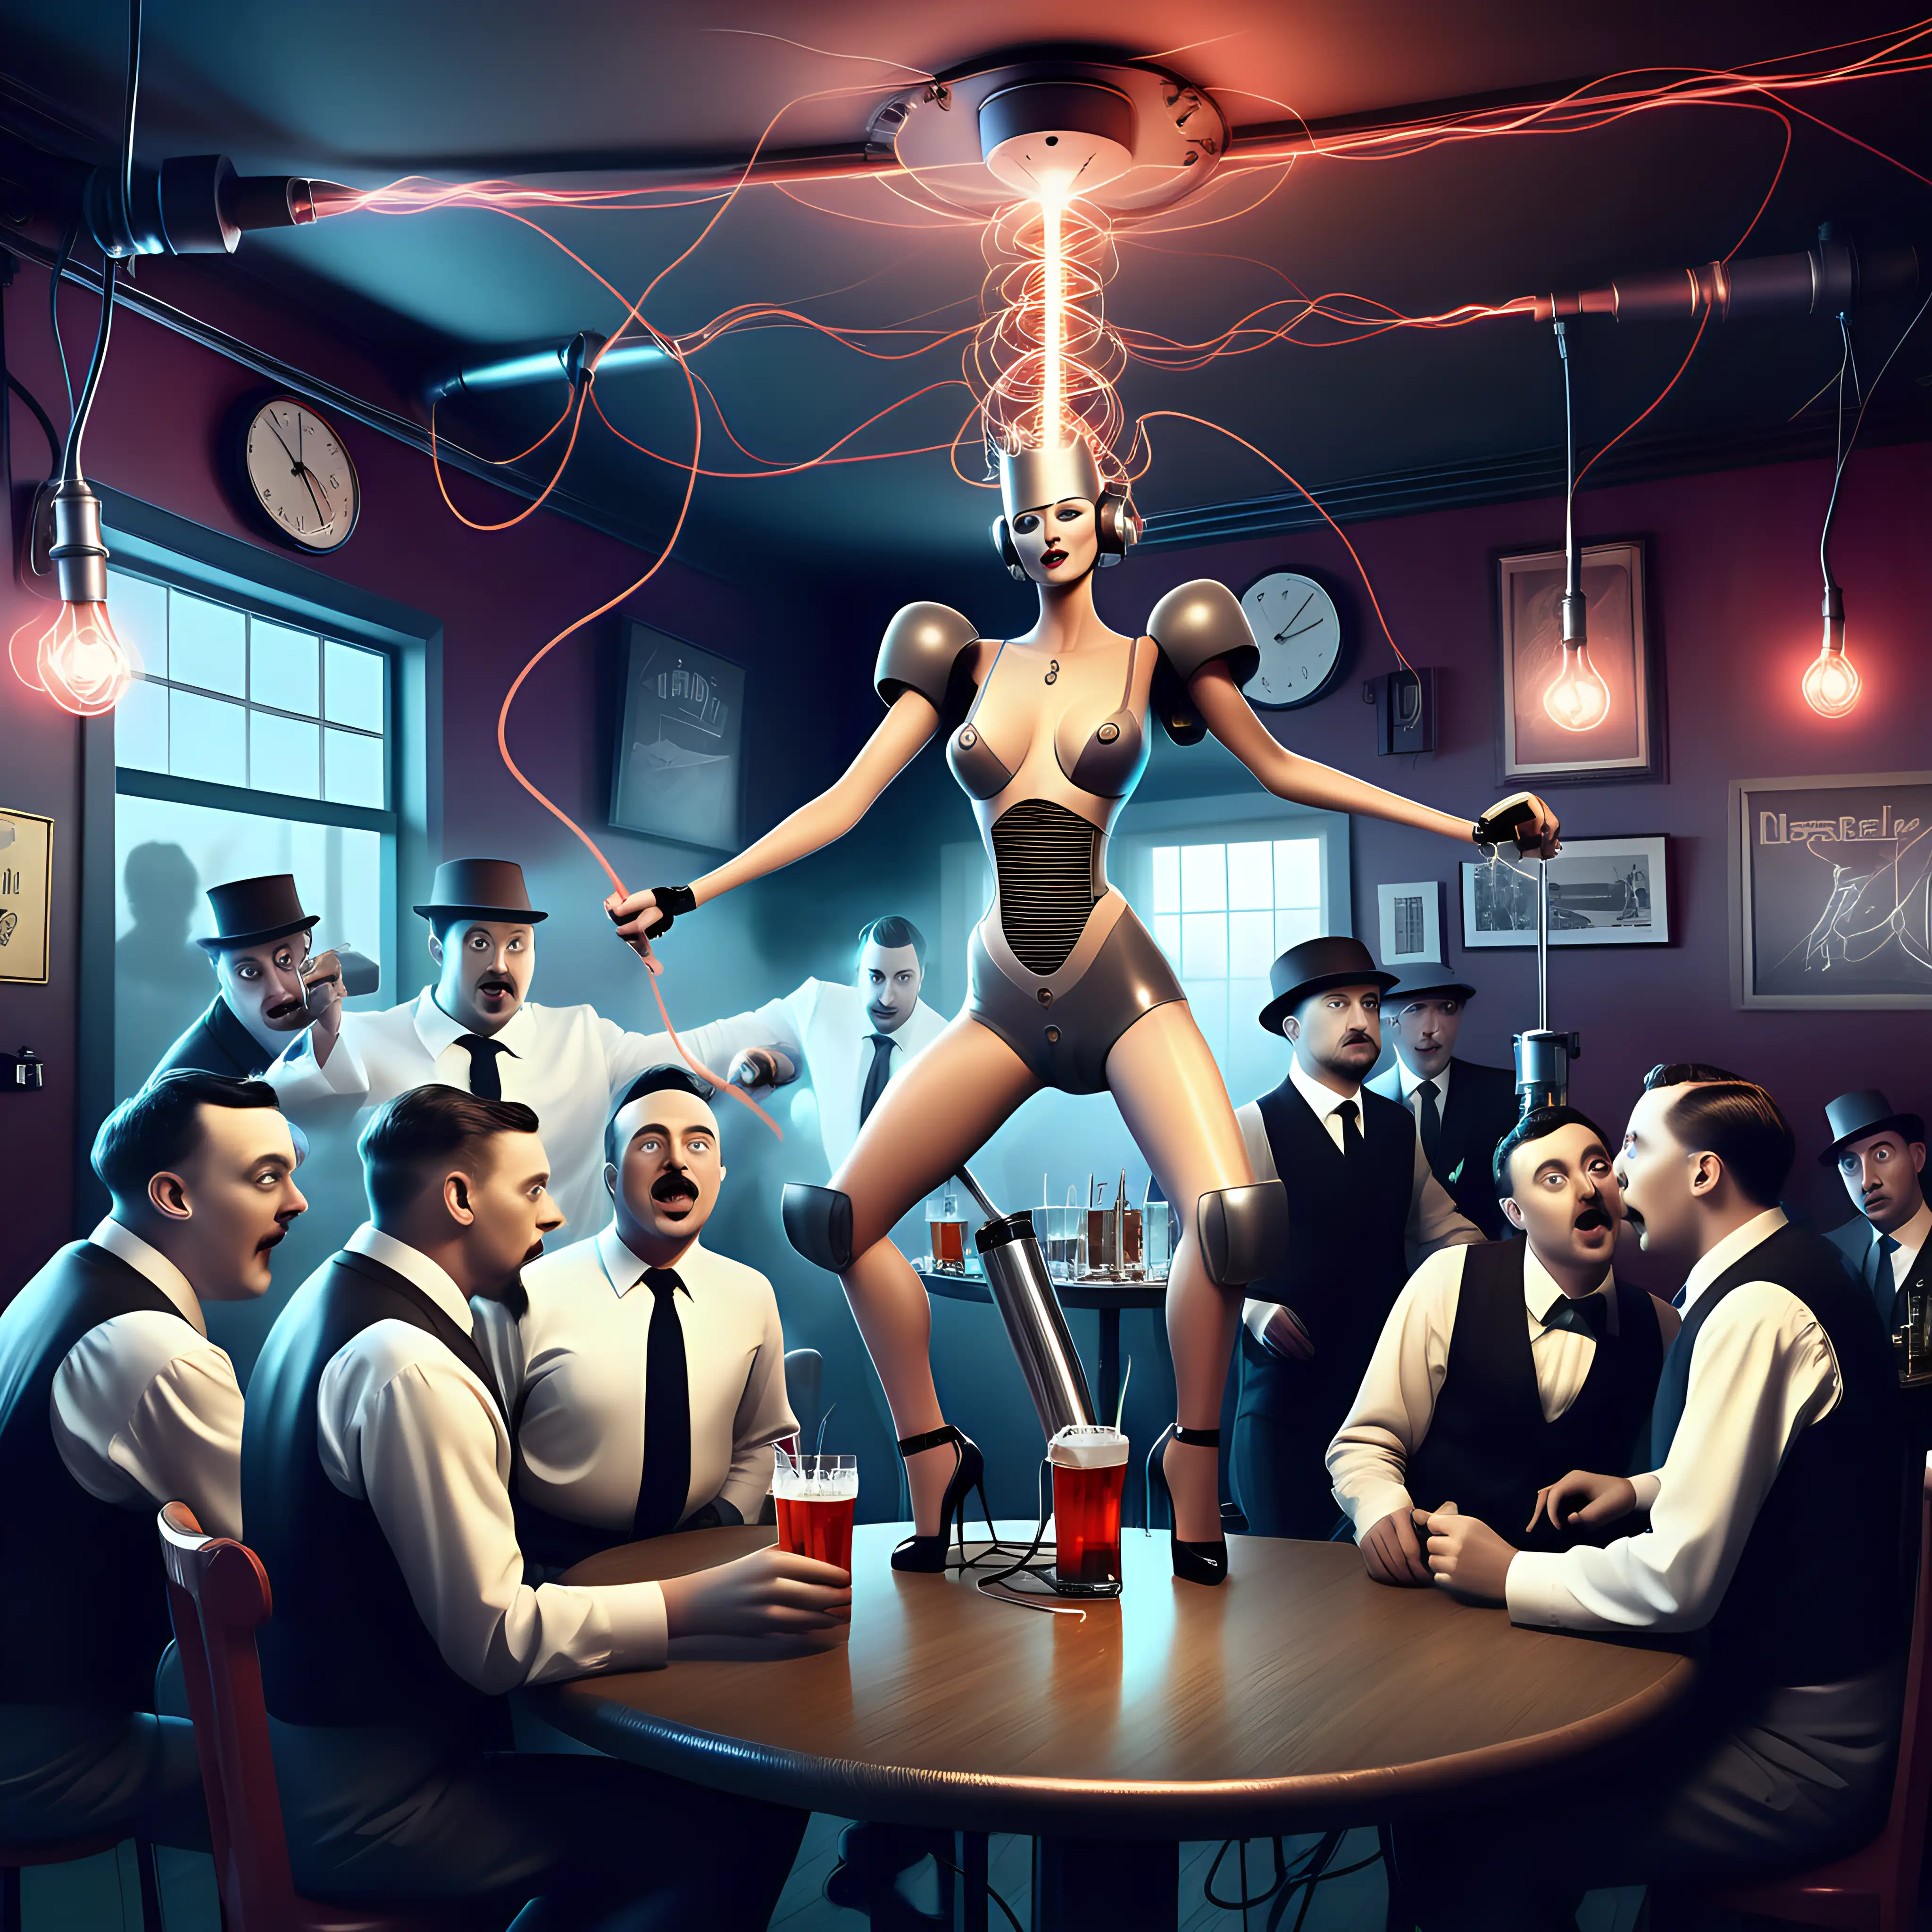 Dali style surrealistic image of a party of drunk electrical engineers in a pub with a tesla coil. A sexy industrial robot performs a pole dance.